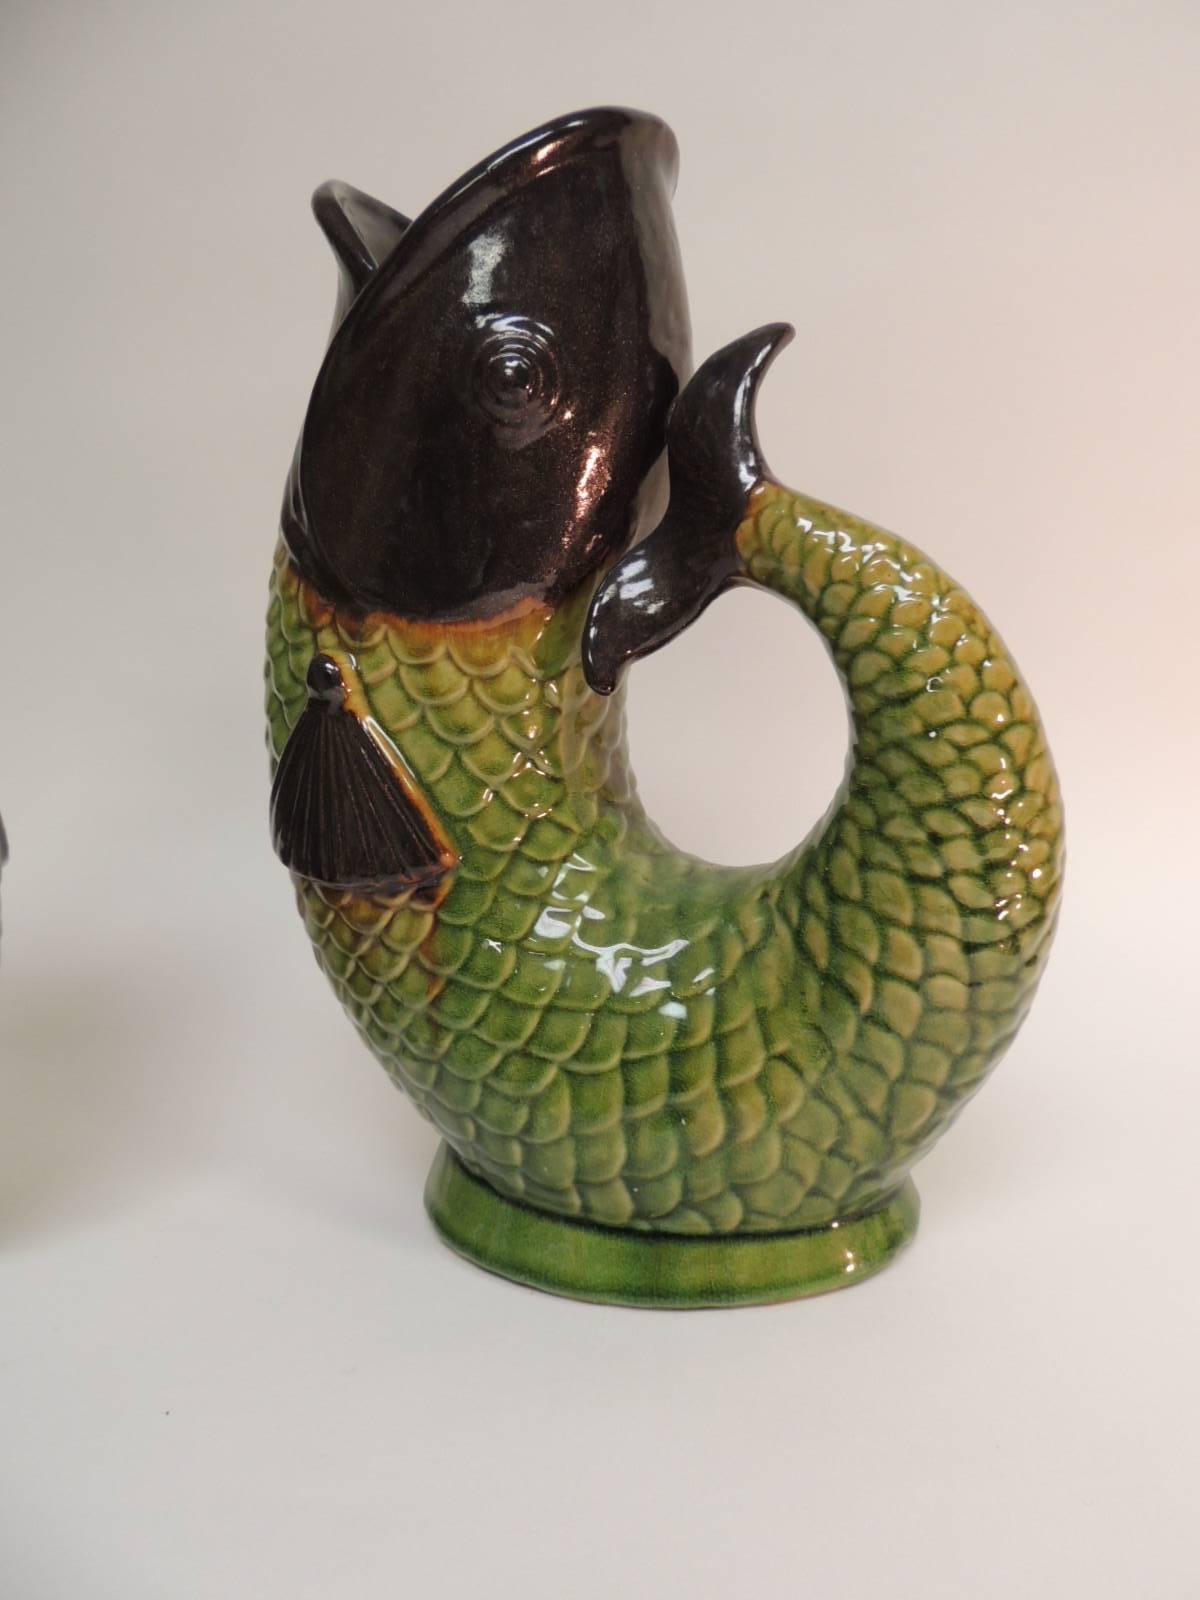 Pair of vintage Chinese hand-painted fish vases
Large Asian flowers or plant vessels. Chinese export hand painted ceramic fish vases with handles.  Green and brown scales, fins and mouth details.  Chinese export porcelain includes a wide range of